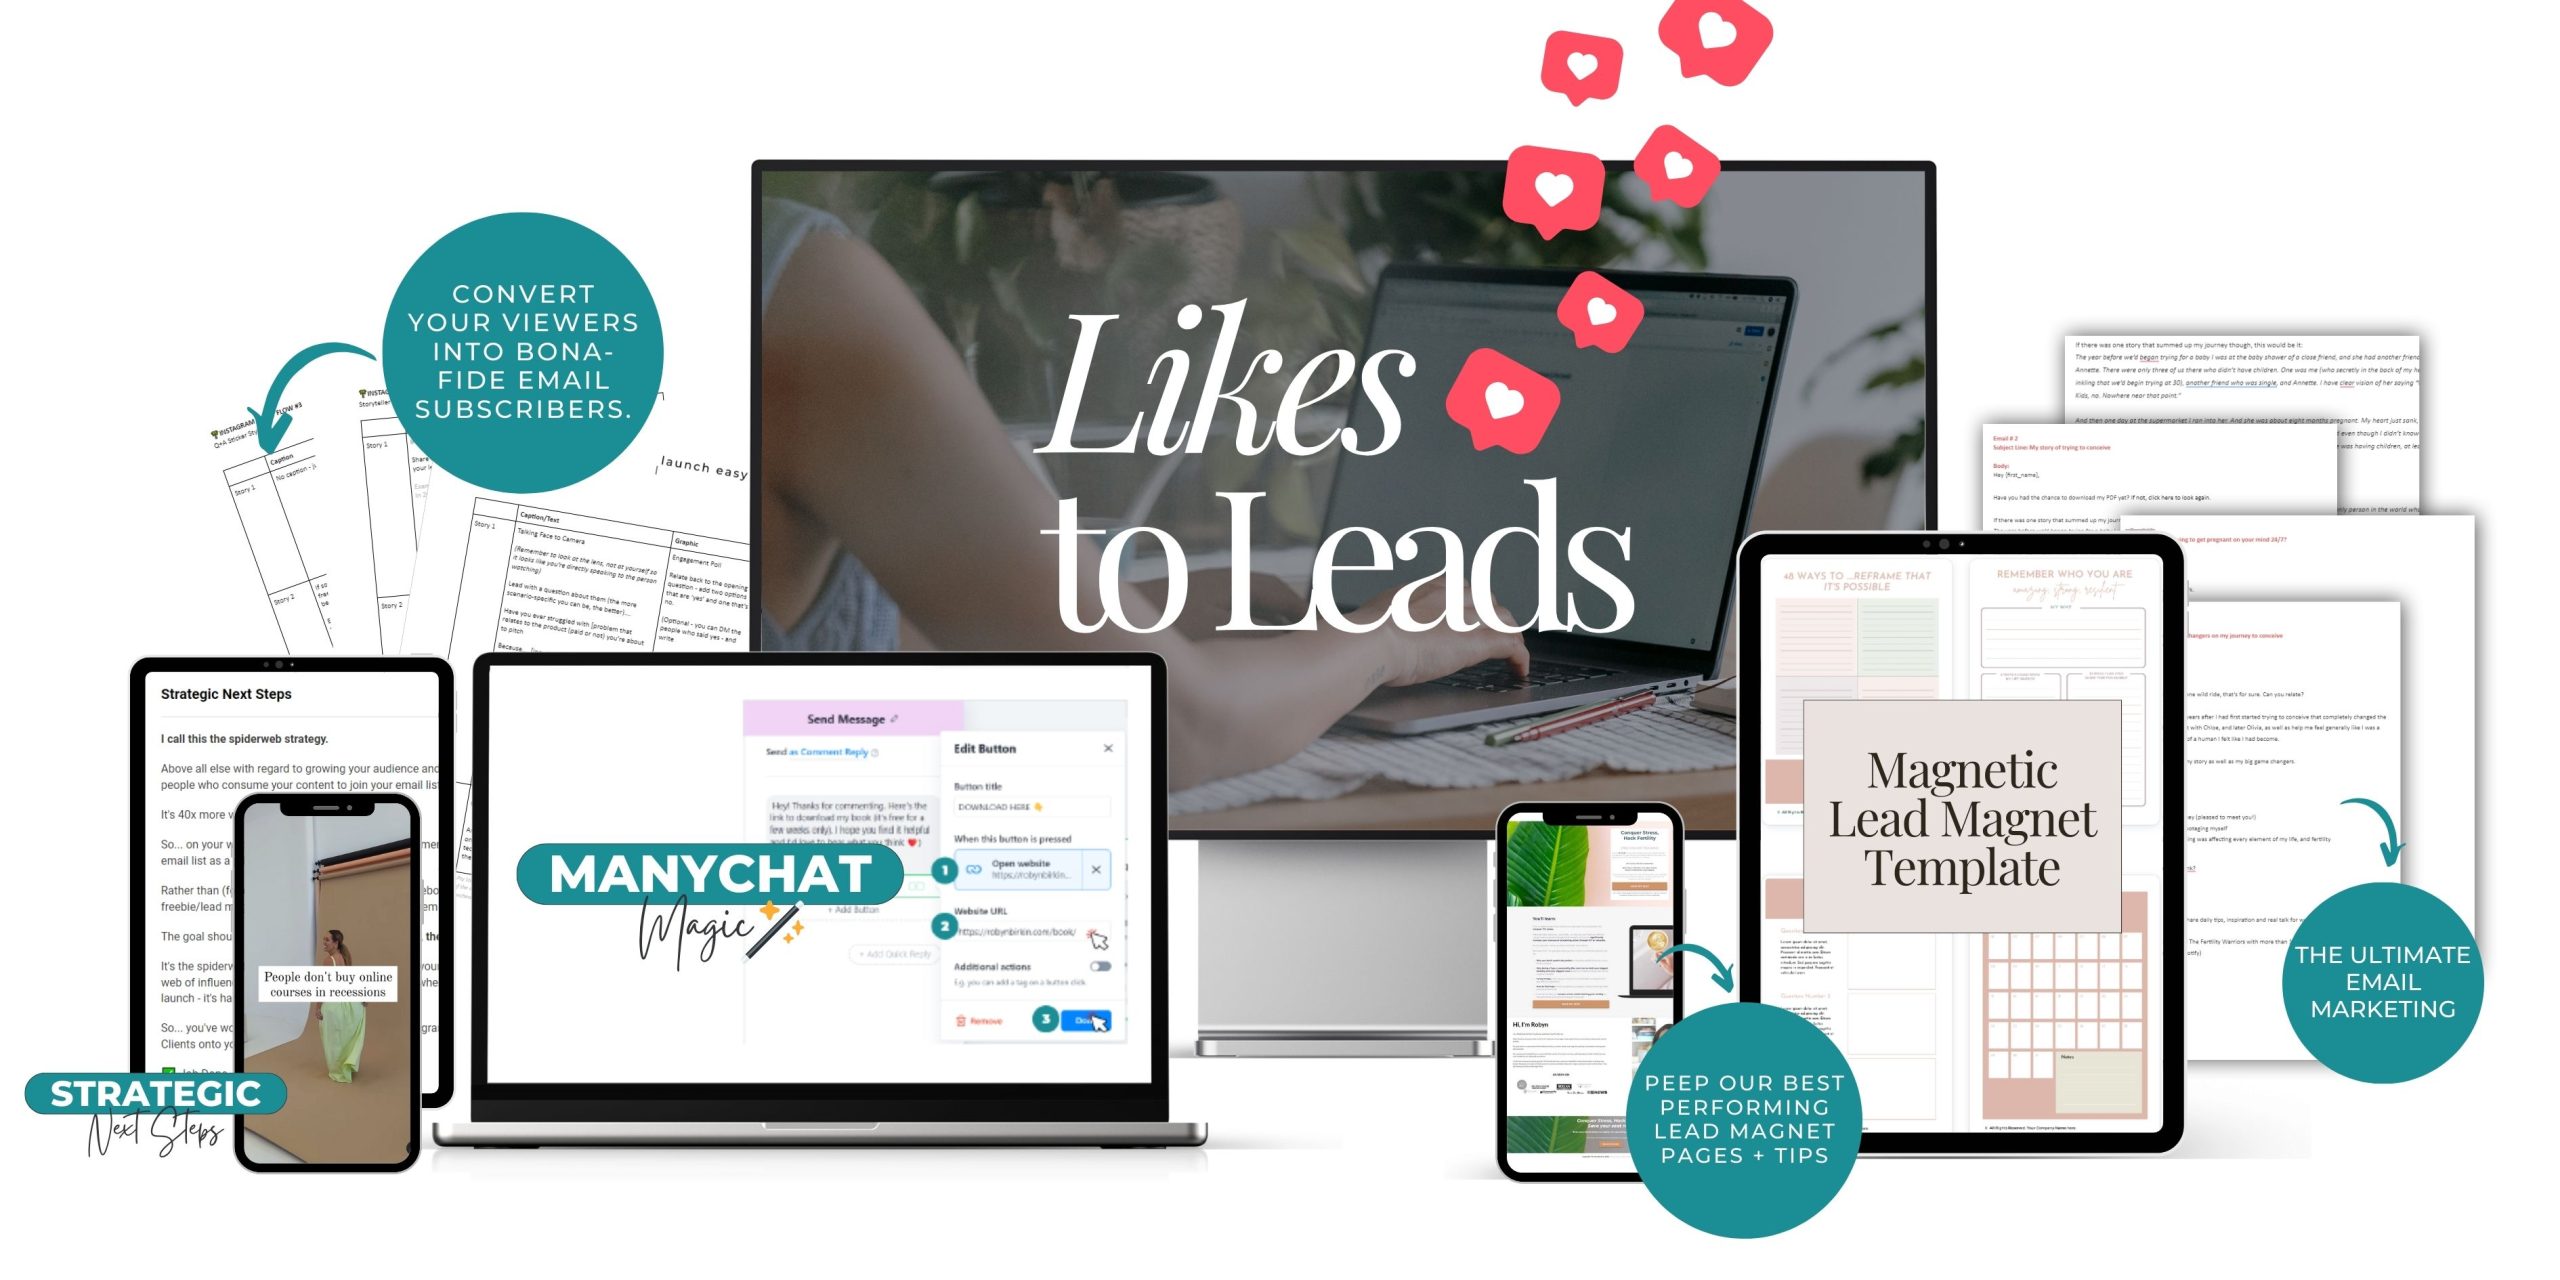 Likes to Lead - Build a 24/7 leads machine that not only boosts your engagement and grows your followers but converts your audience into launch-ready leads